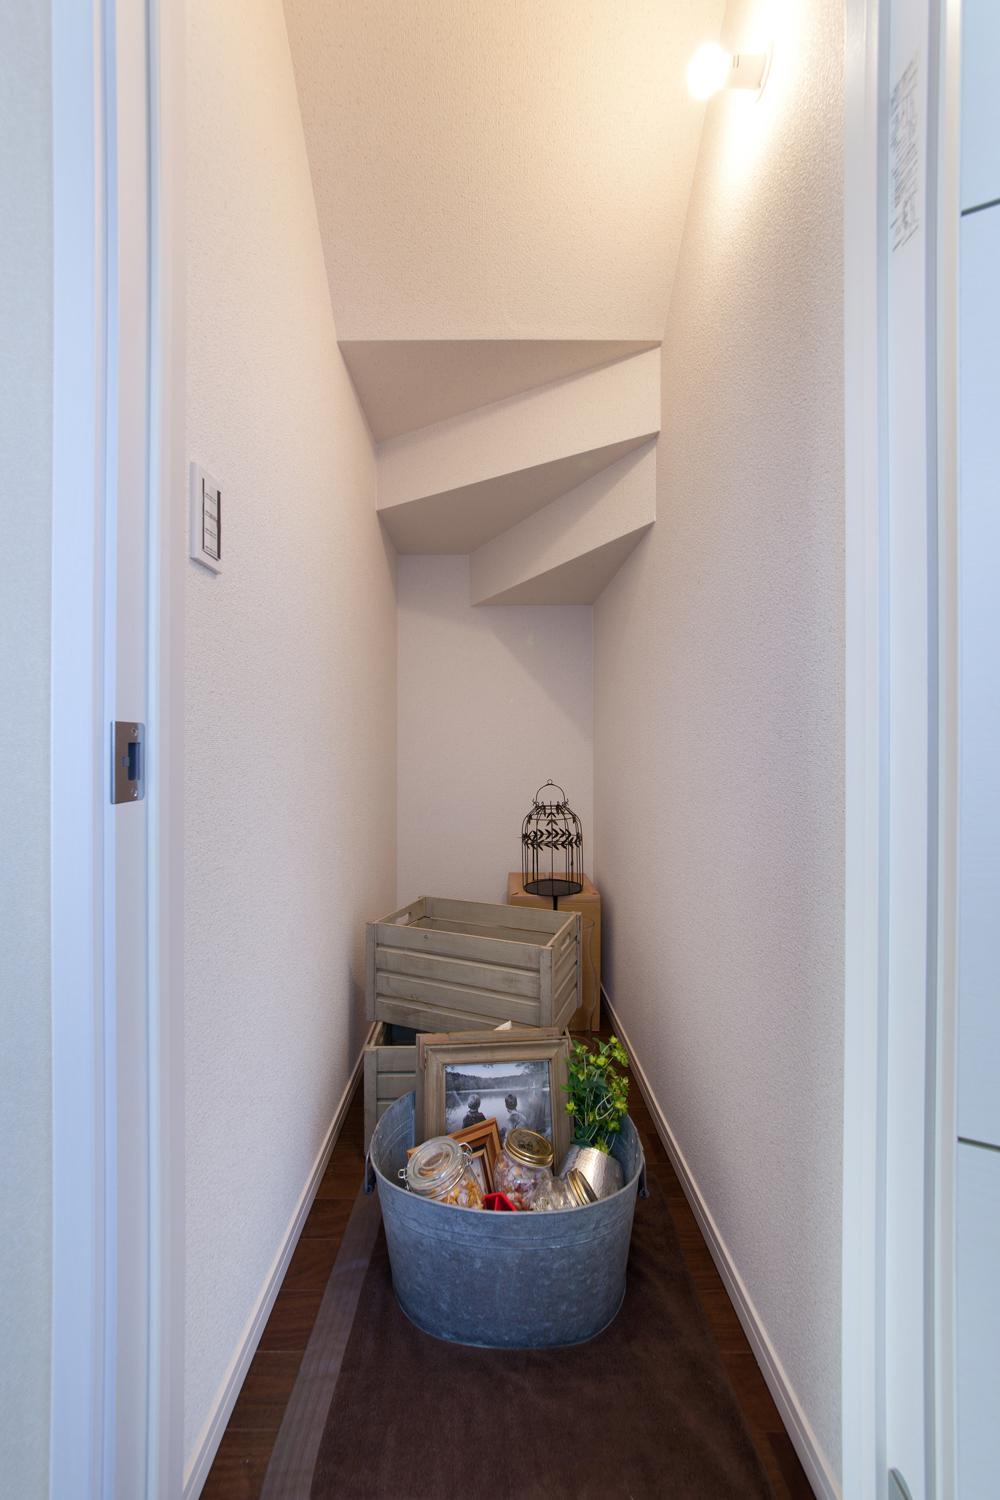 Receipt. First floor of stairs under storage. For storage, such as vacuum cleaners and ironing board. It is also a useful space that can be stored securely those with height.